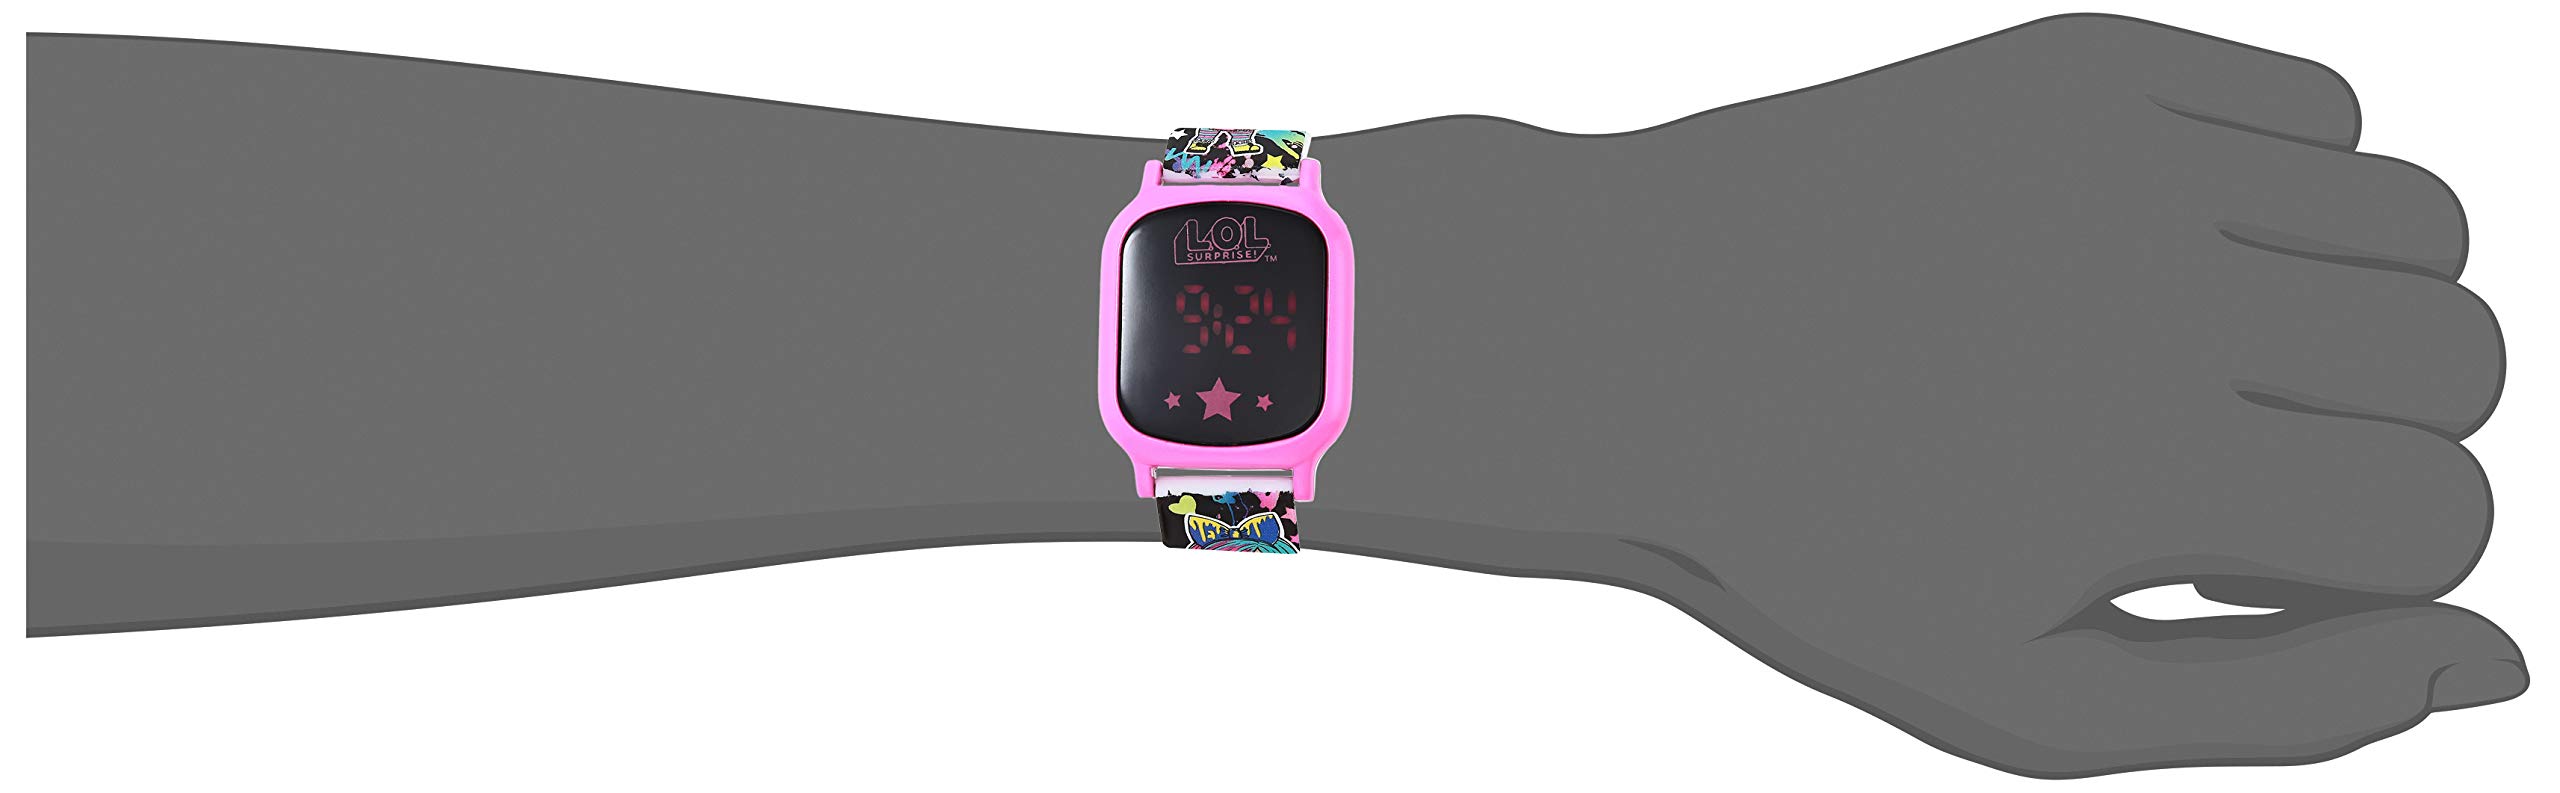 L.O.L. Surprise Kids' Touch LED Digital Watch, with Character Details on Watch Band Model: LOL4338AZ